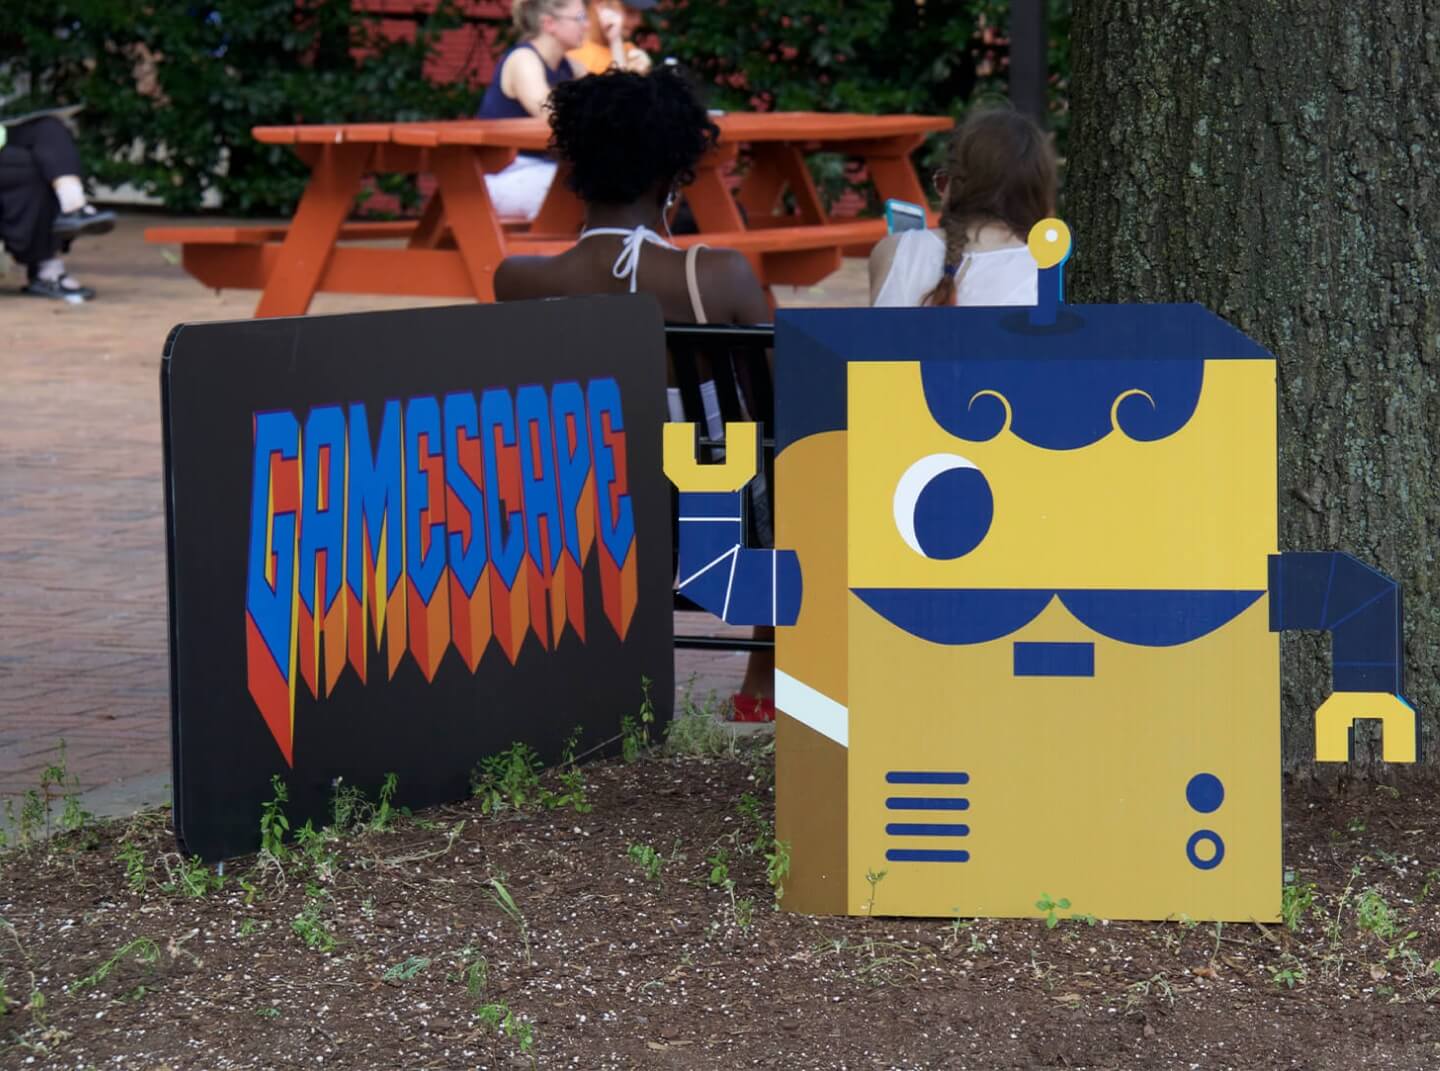 idfive designed cutouts of a robot and logo for the University of Baltimore's Gamescape interactive experience at Baltimore's Artscape